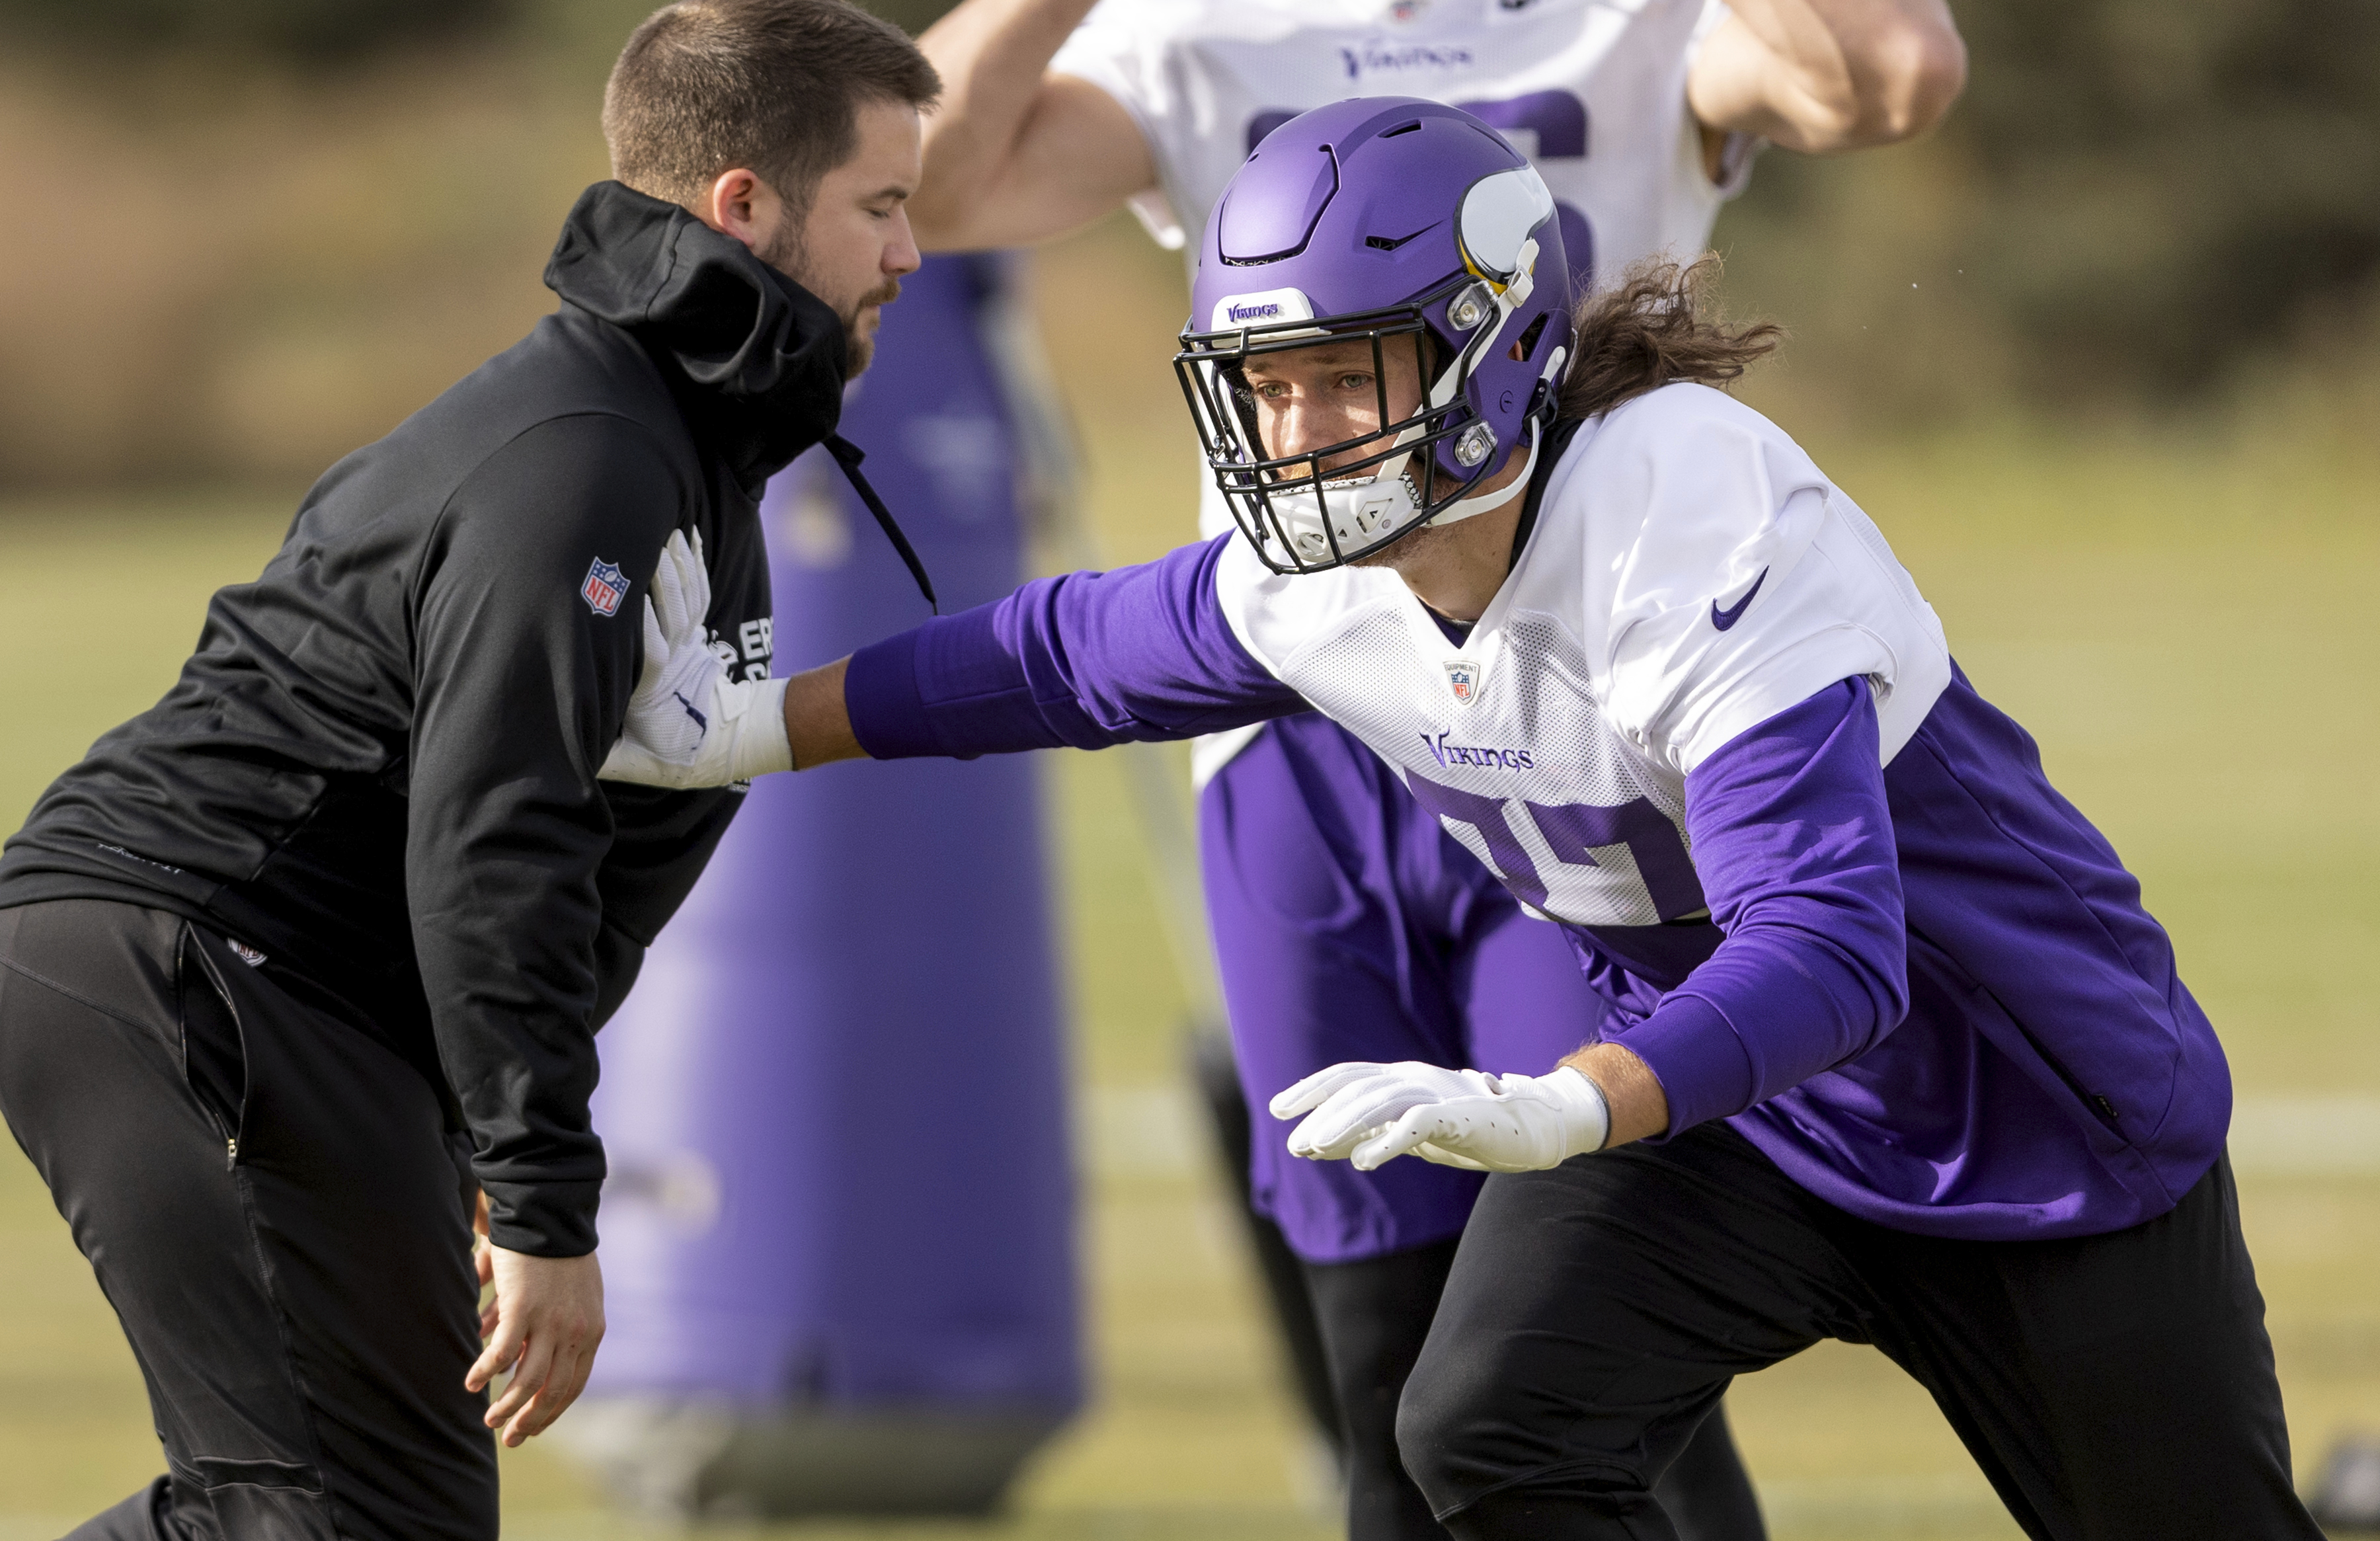 Newly acquired Minnesota Vikings tight end T.J. Hockenson (87) runs drills during NFL football practice on Wednesday, Nov. 2, 2022, in Eagan, Minn. Hockenson has been one of the league’s most productive pass-catching tight ends since the Lions picked him eighth overall in the first round of the 2019 draft out of Iowa. (Carlos Gonzalez/Star Tribune via AP)